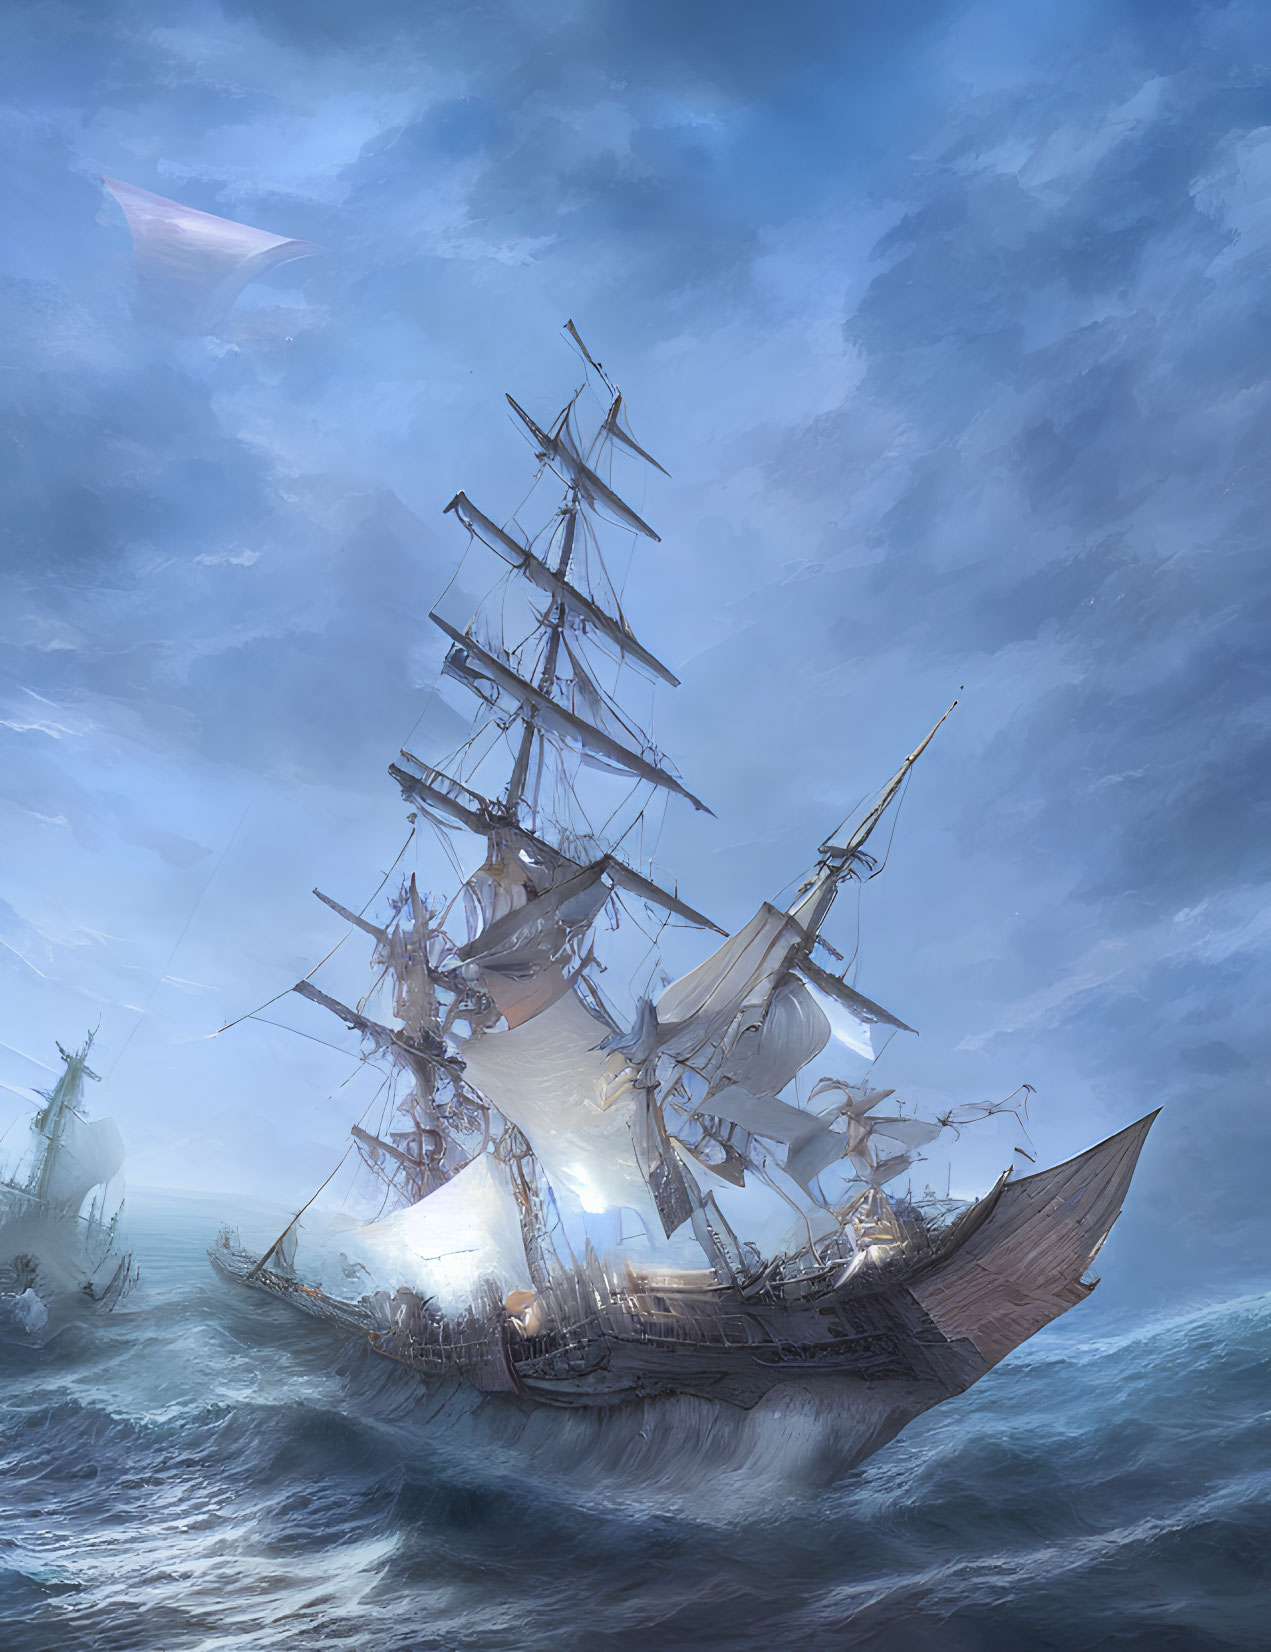 Naval battle scene with sailing ships in turbulent seas